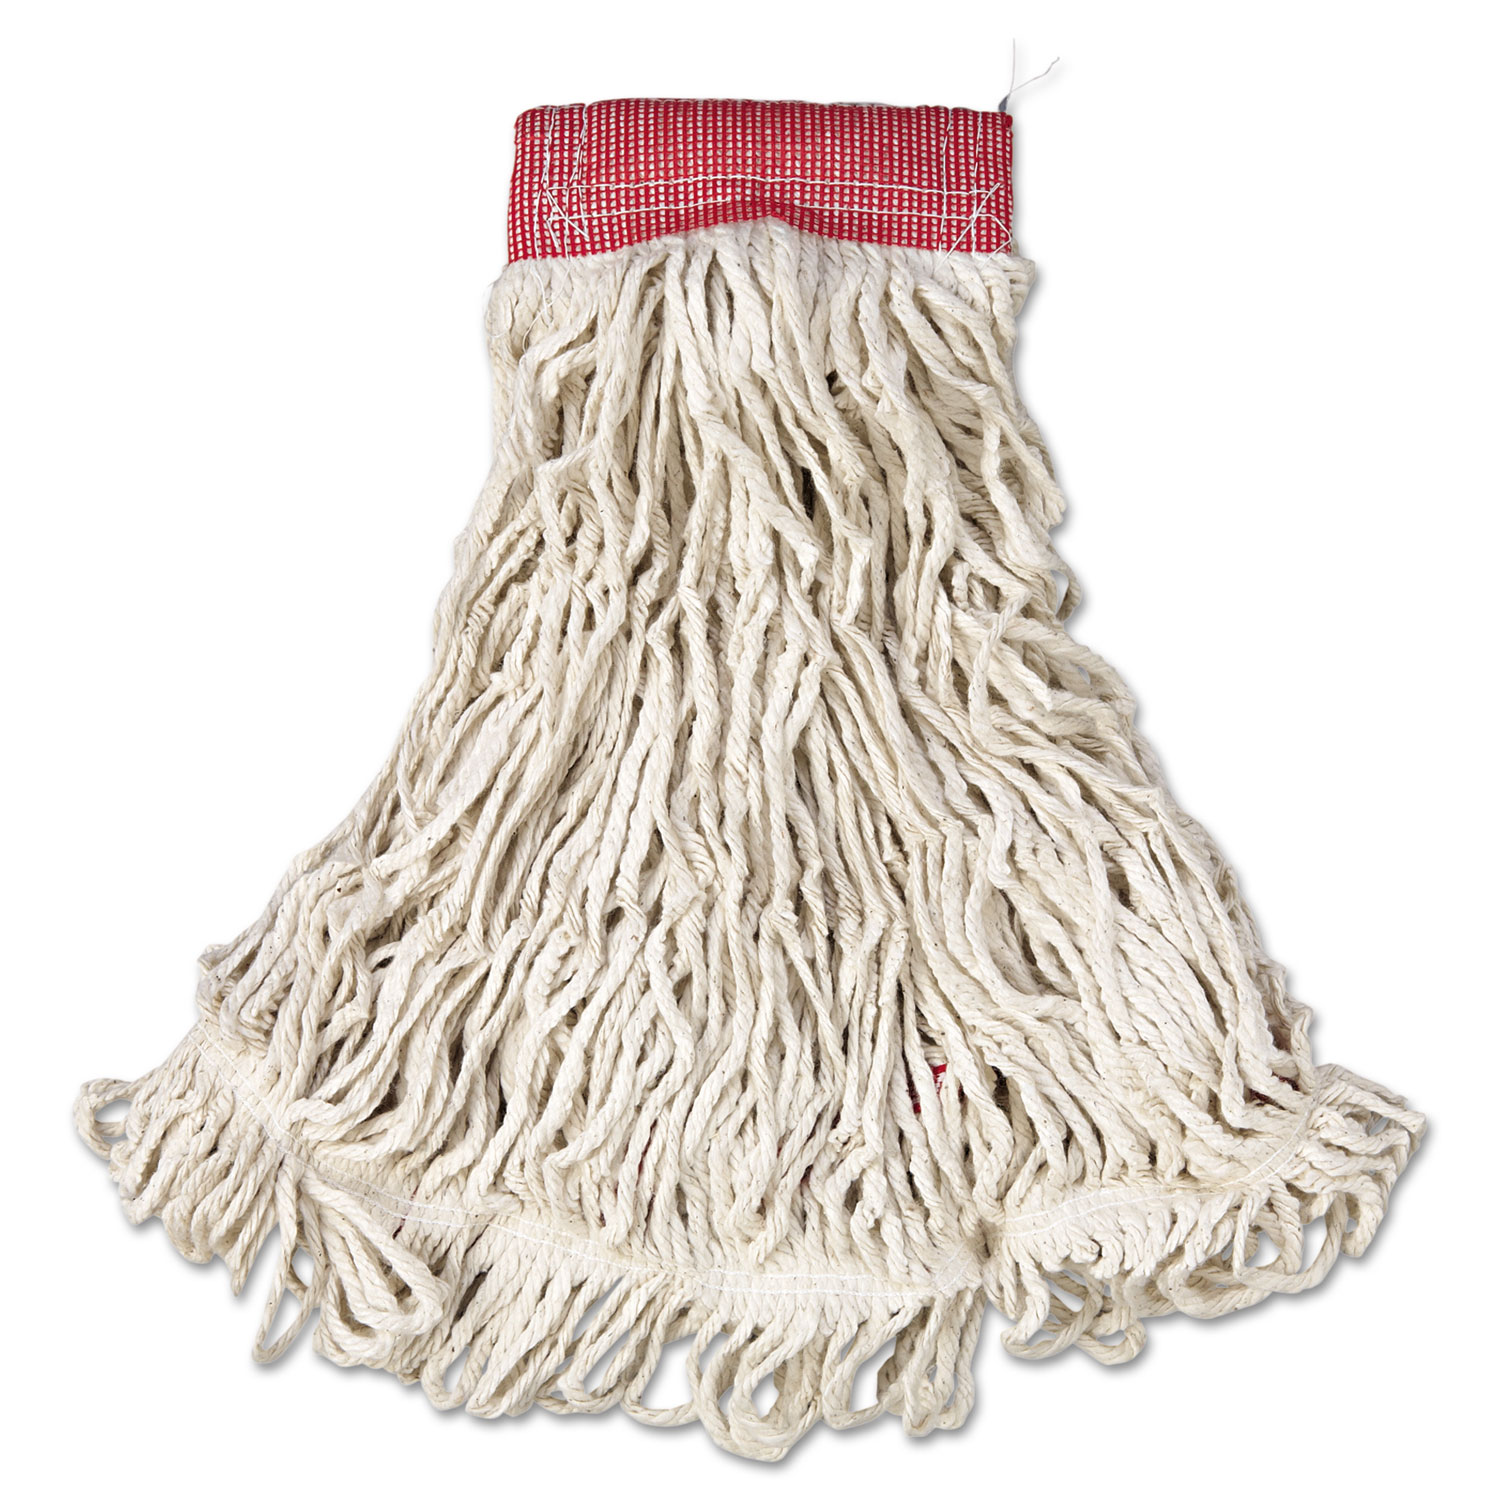  Rubbermaid Commercial FGA15306WH00 Web Foot Wet Mop, Cotton/Synthetic, White, Large, 5 Red Headband, 6/Carton (RCPA153WHI) 